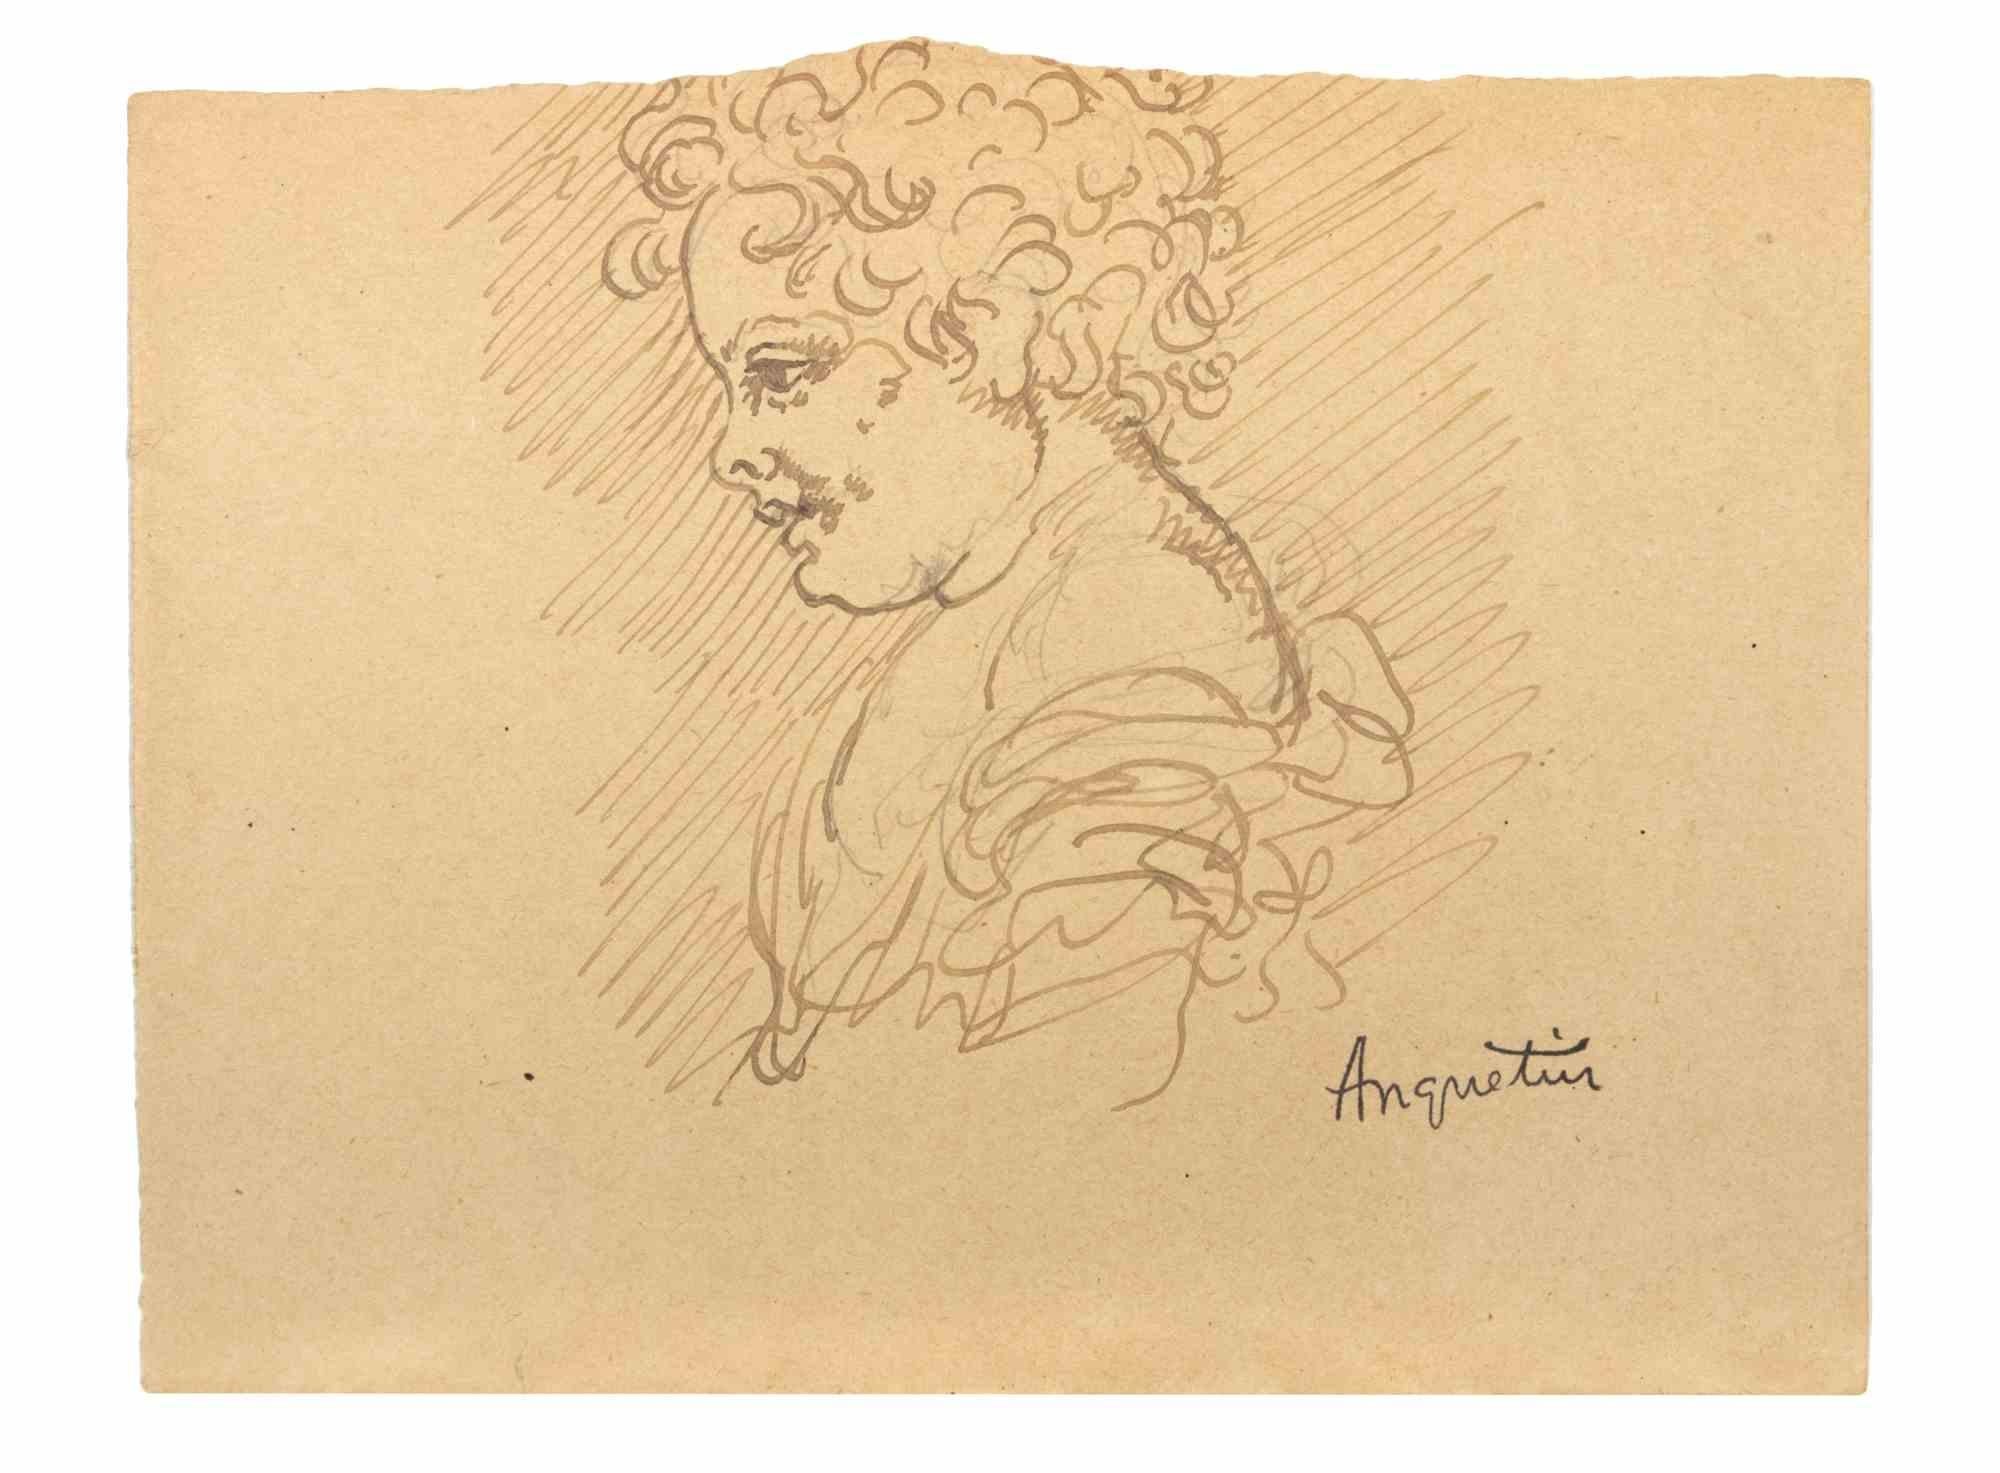 The Child Profile is an ink drawing on paper realized in the early 20th Century by Louis Anquetin (1861-1932).

Hand-signed on the lower.

Good condition.

Louis Émile Anquetin (26 January 1861 – 19 August 1932) was a French painter. In 1882 he came